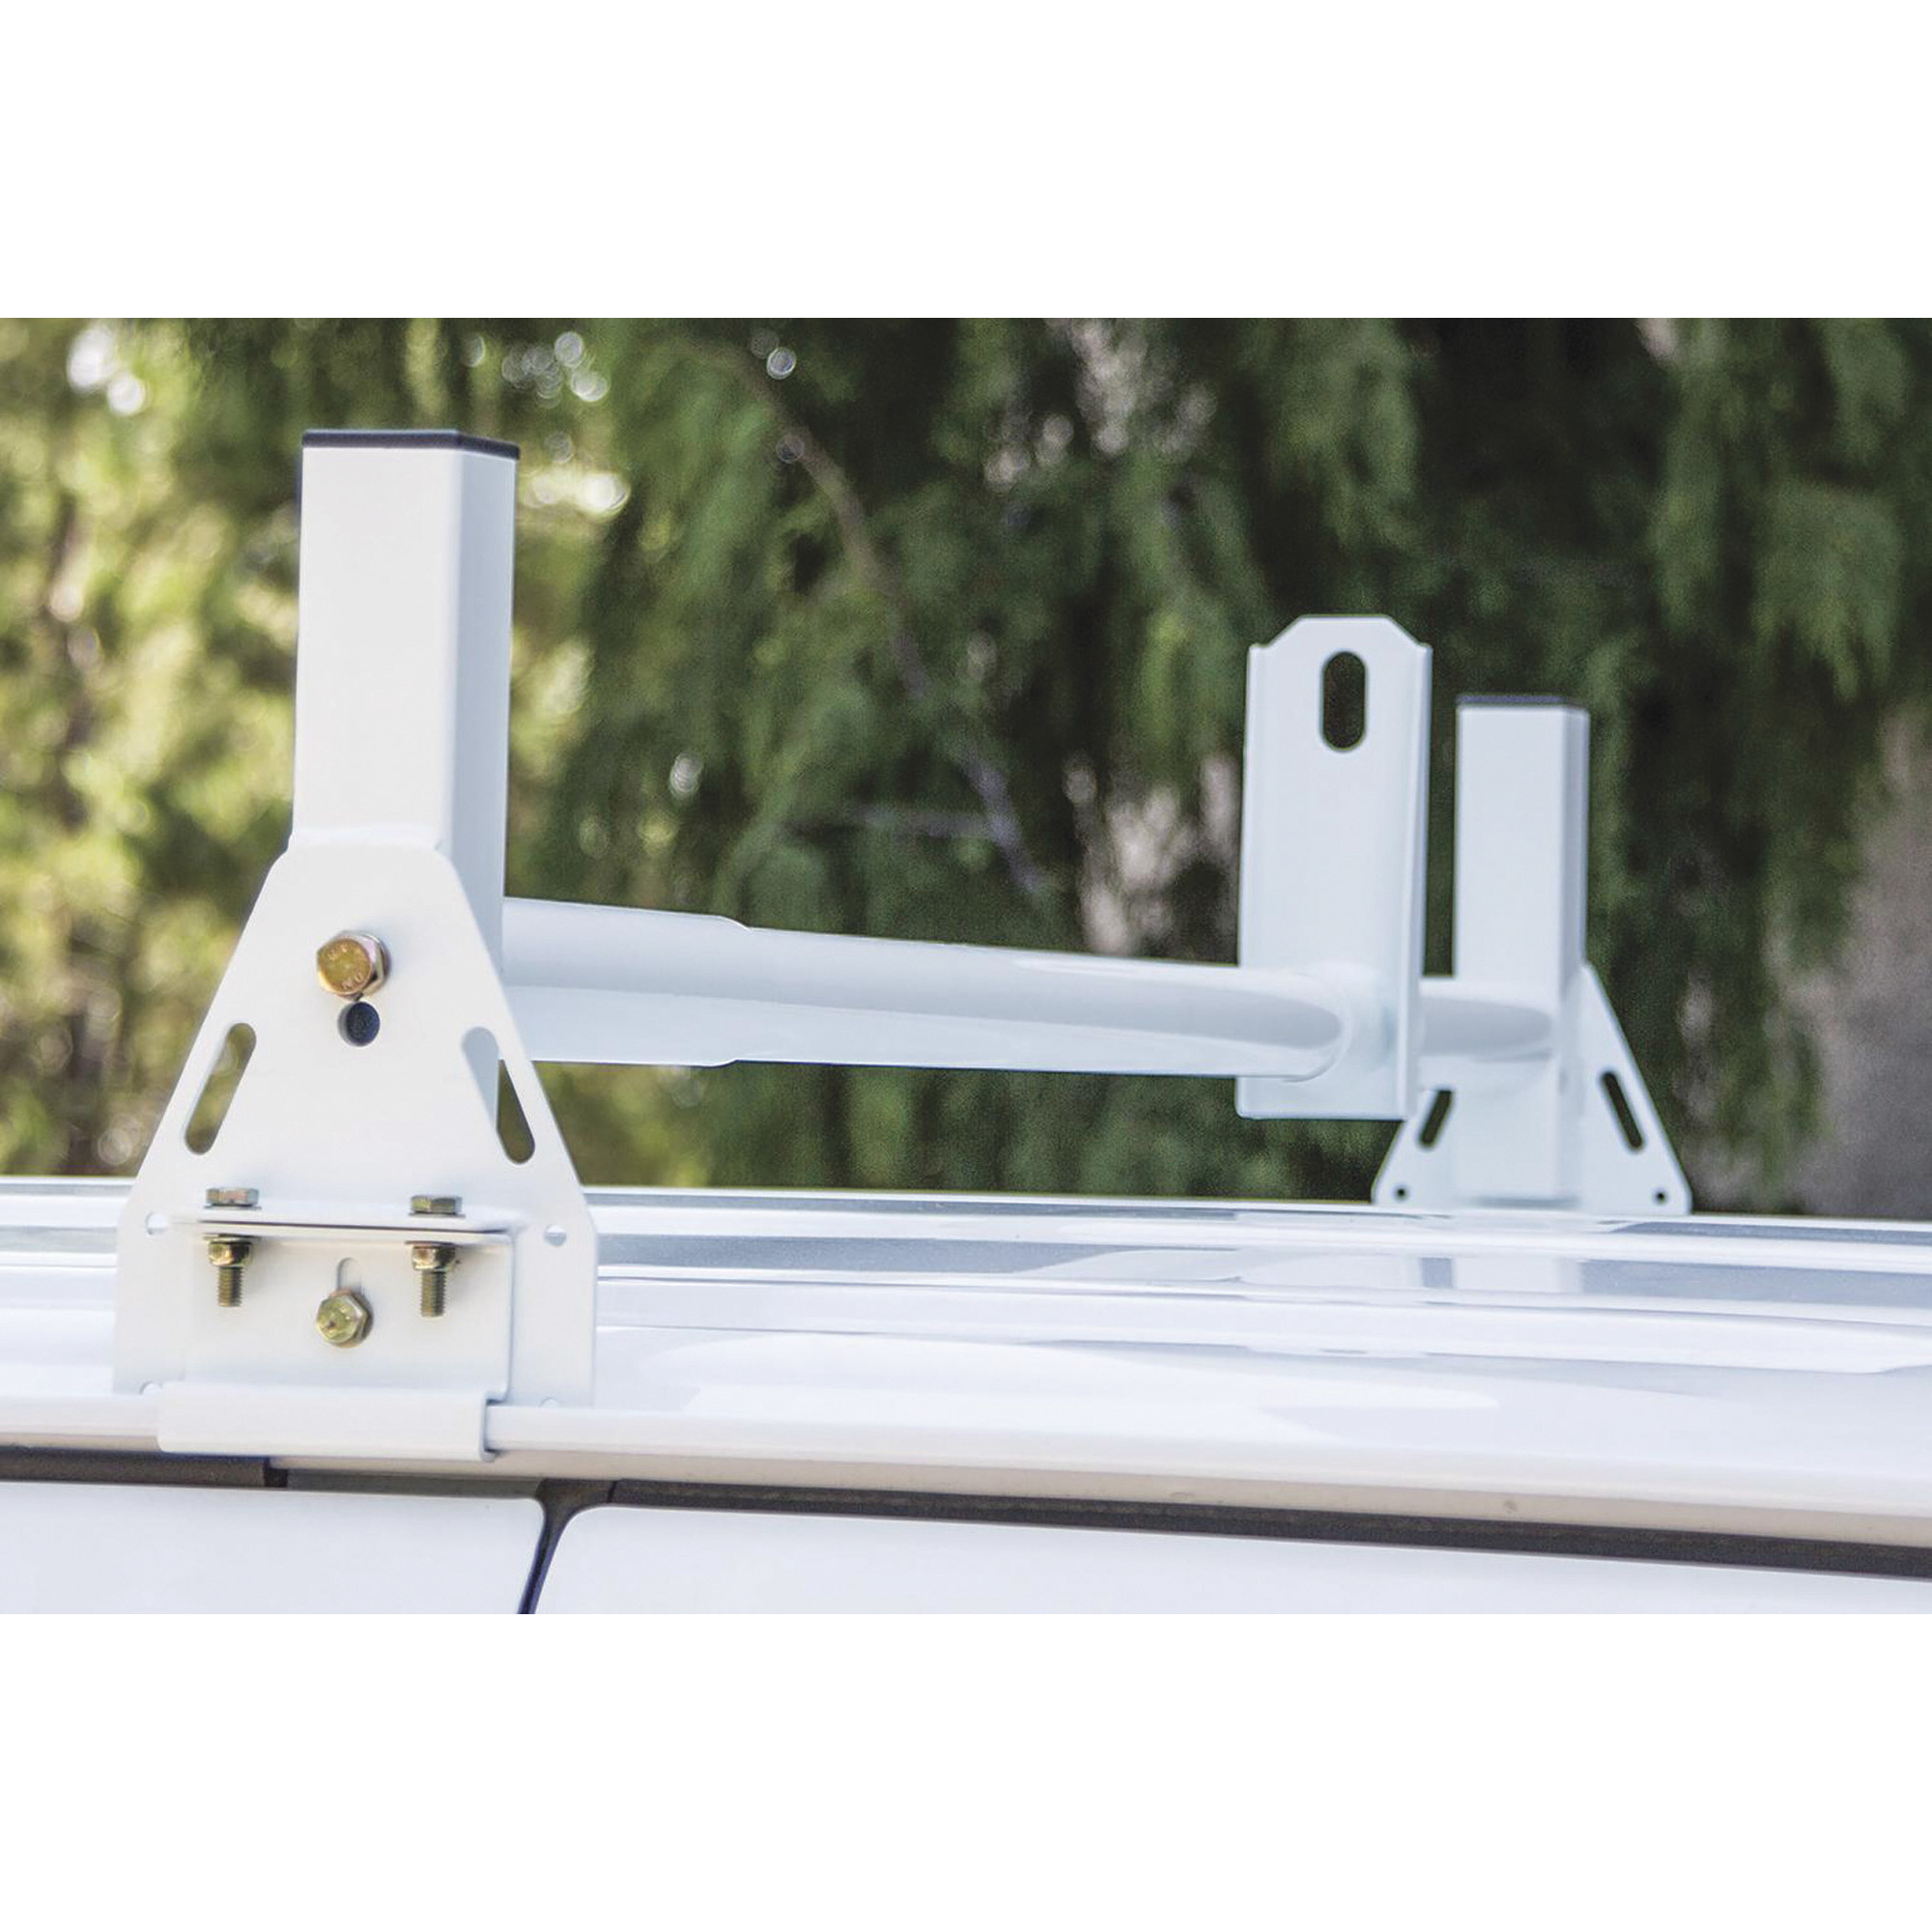 Buyers Products Optional Ladder Rack Crossbar, For Use With Item# 42880, Steel, White, Model 1501311